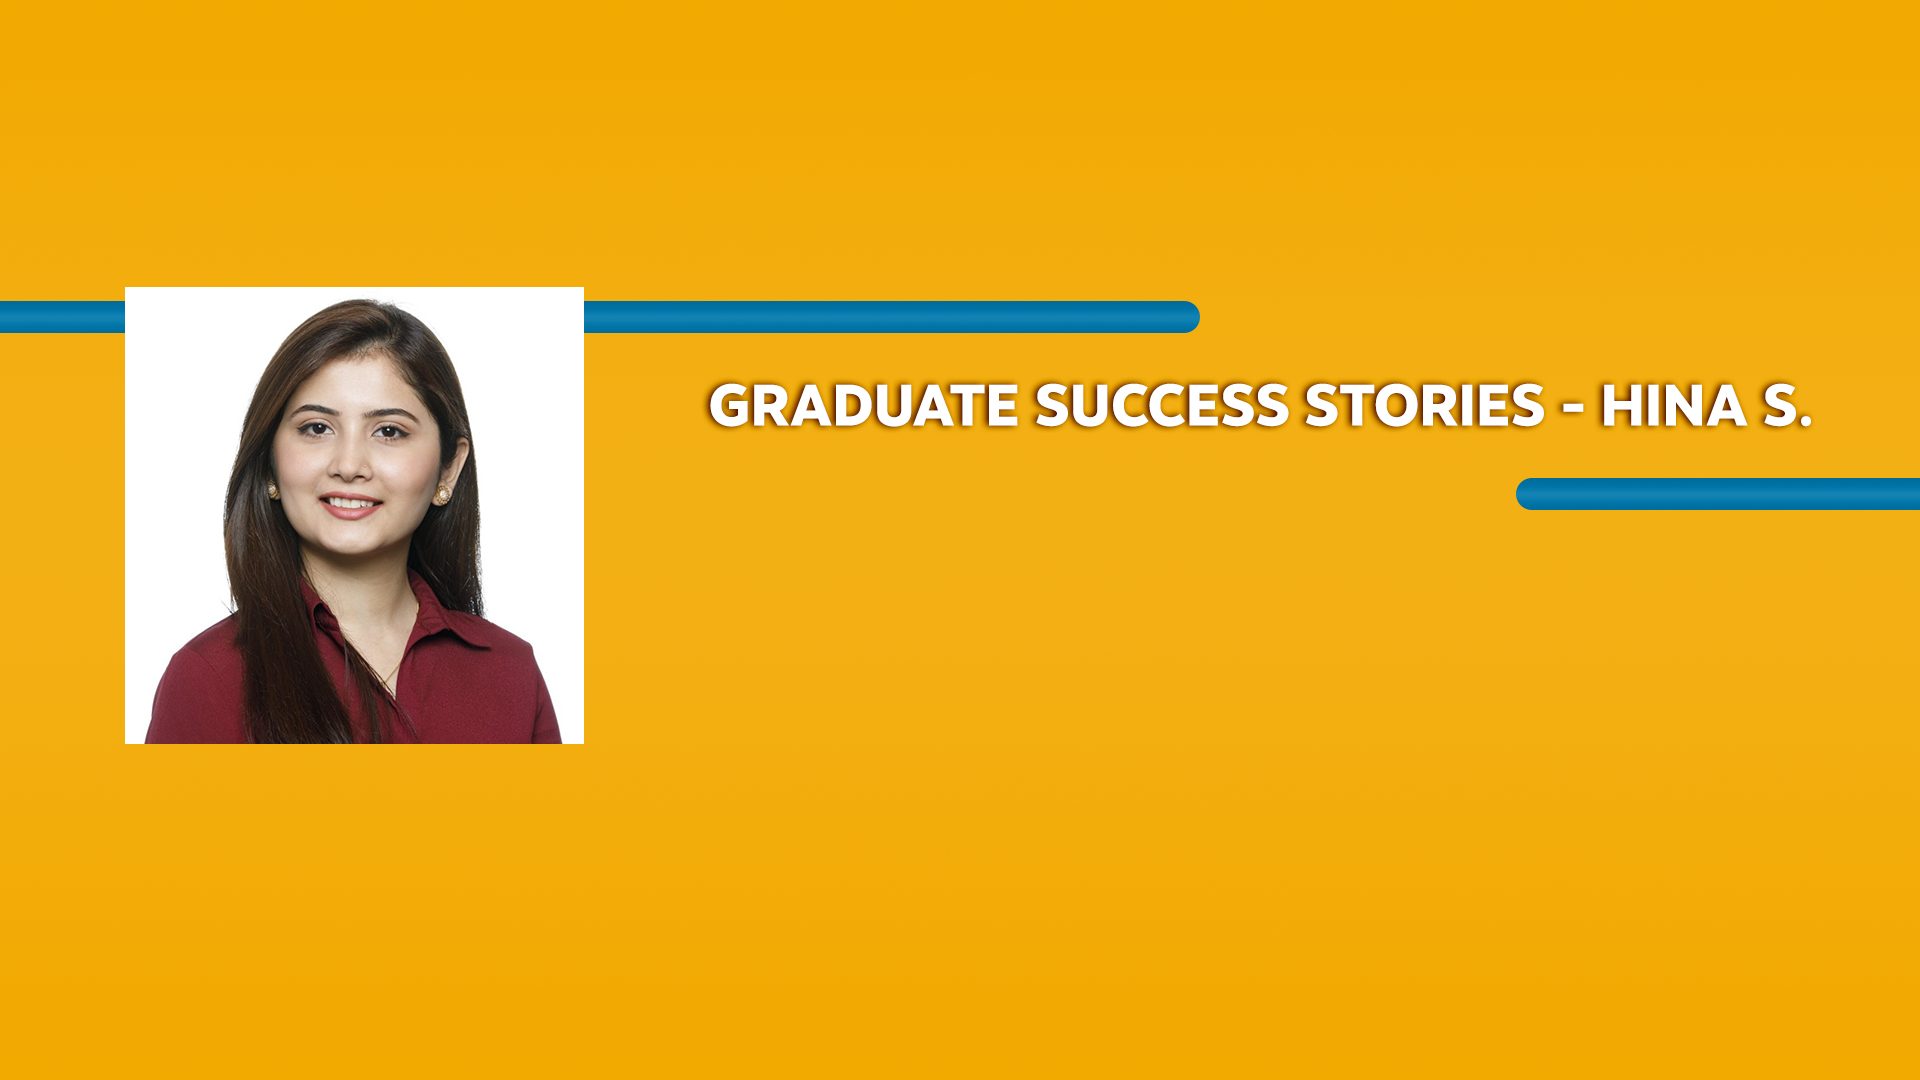 Orange rectangle with a picture of a woman wearing a shirt and Graduate Success Stories - Hina S. text in white font